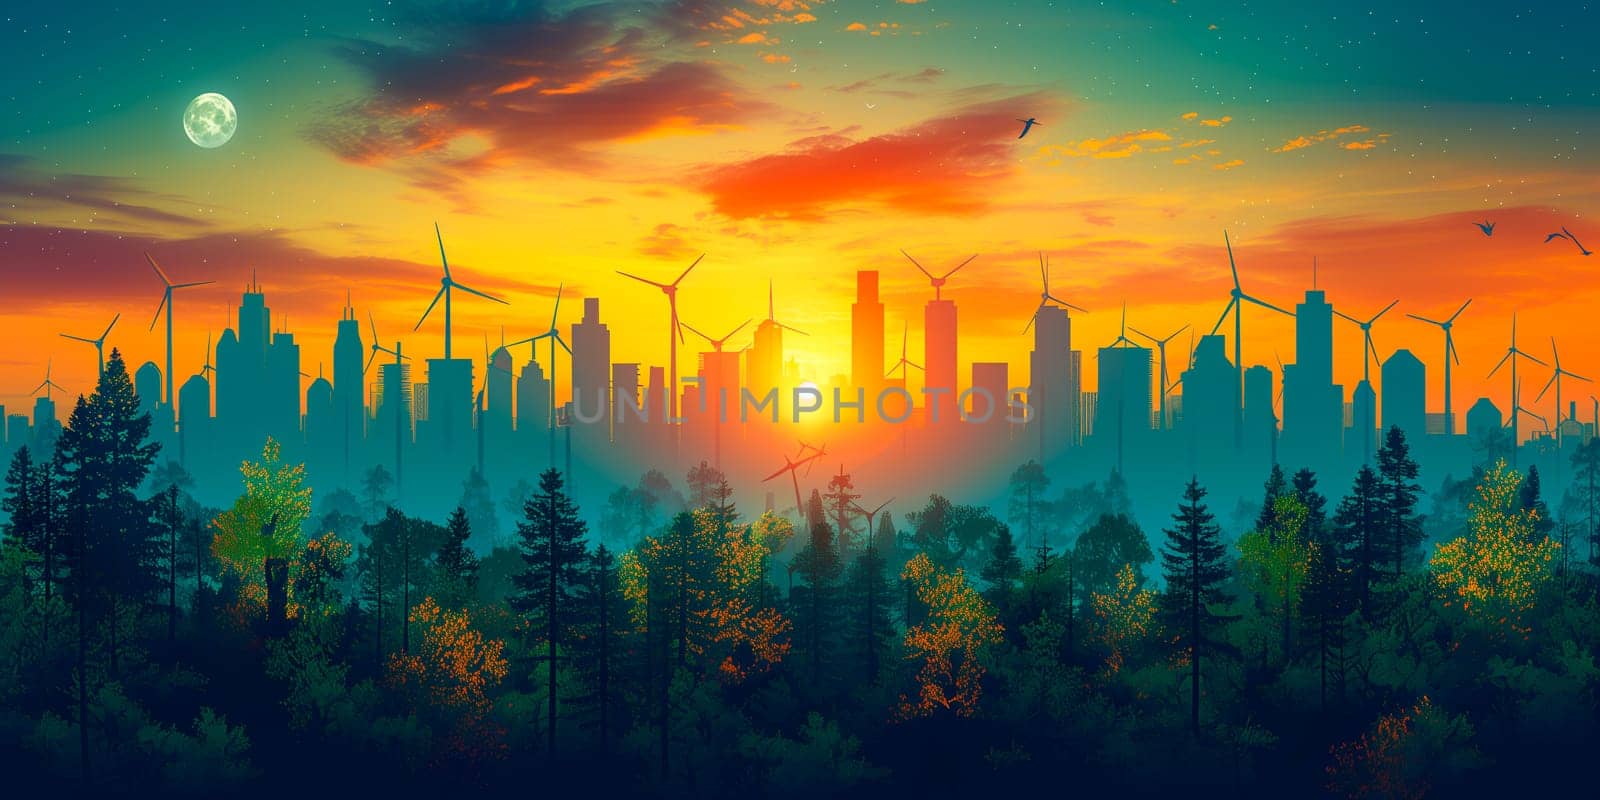 Big city with skyscrapers and wind turbines in background. Concept of sustainable energy solution by sarymsakov